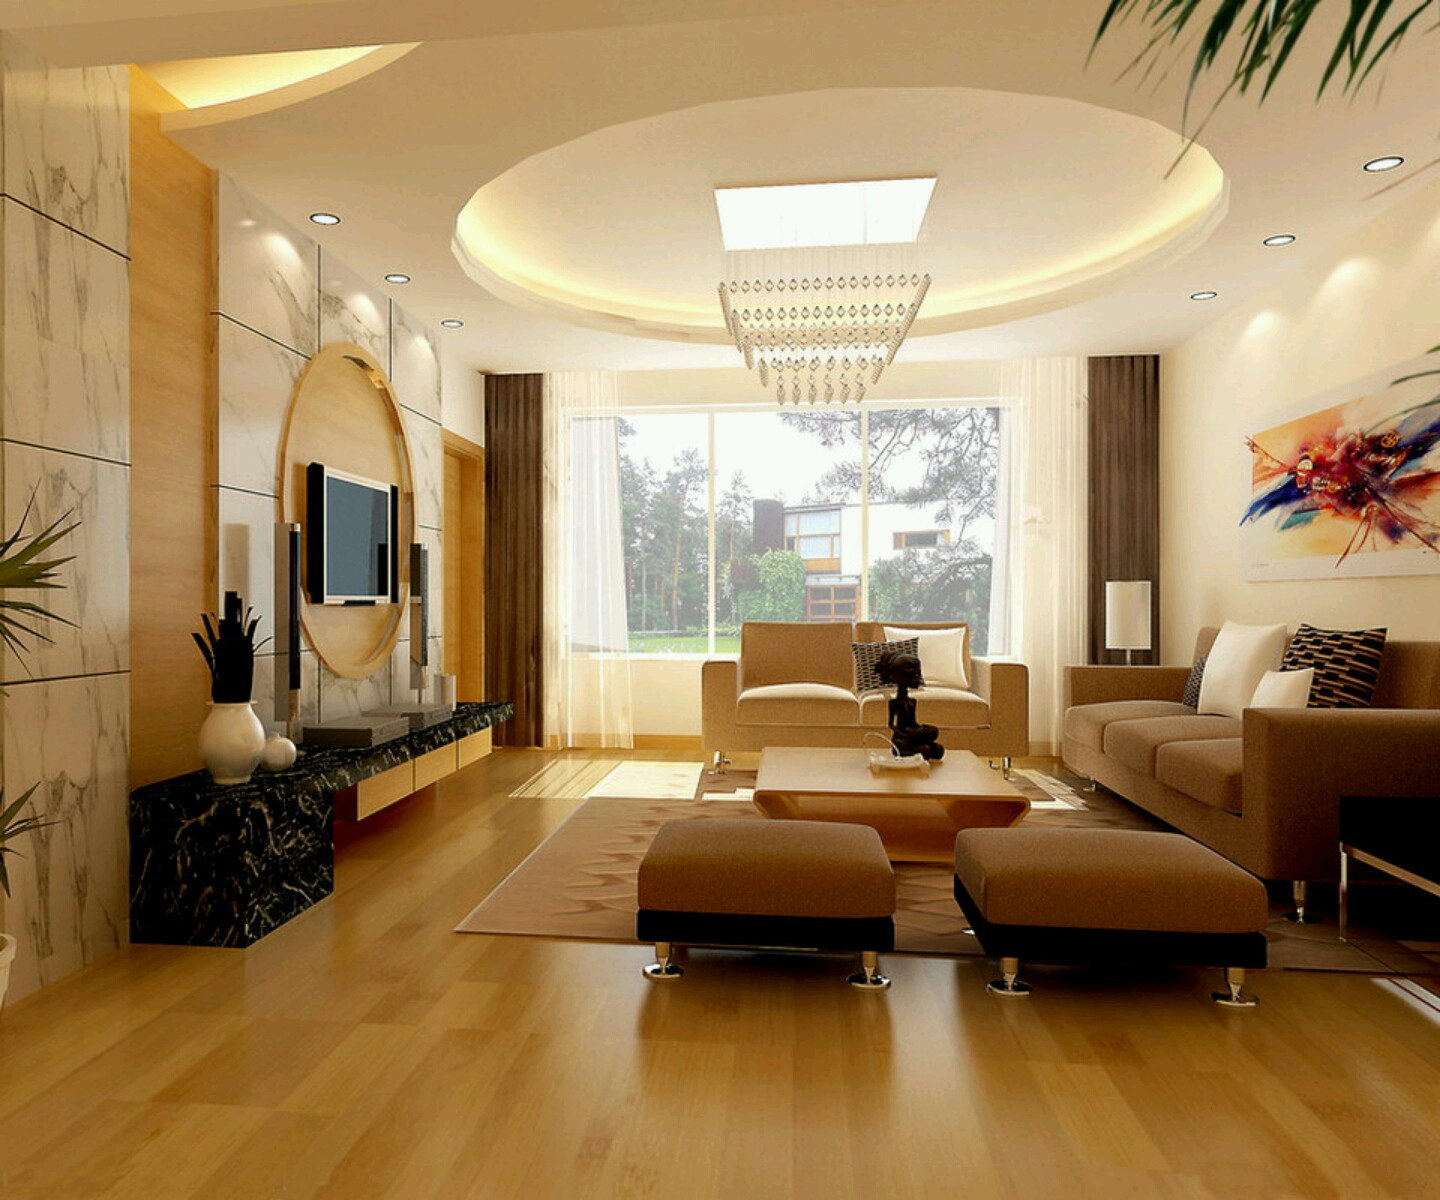 Home Decor Pictures Living Room
 Modern interior decoration living rooms ceiling designs